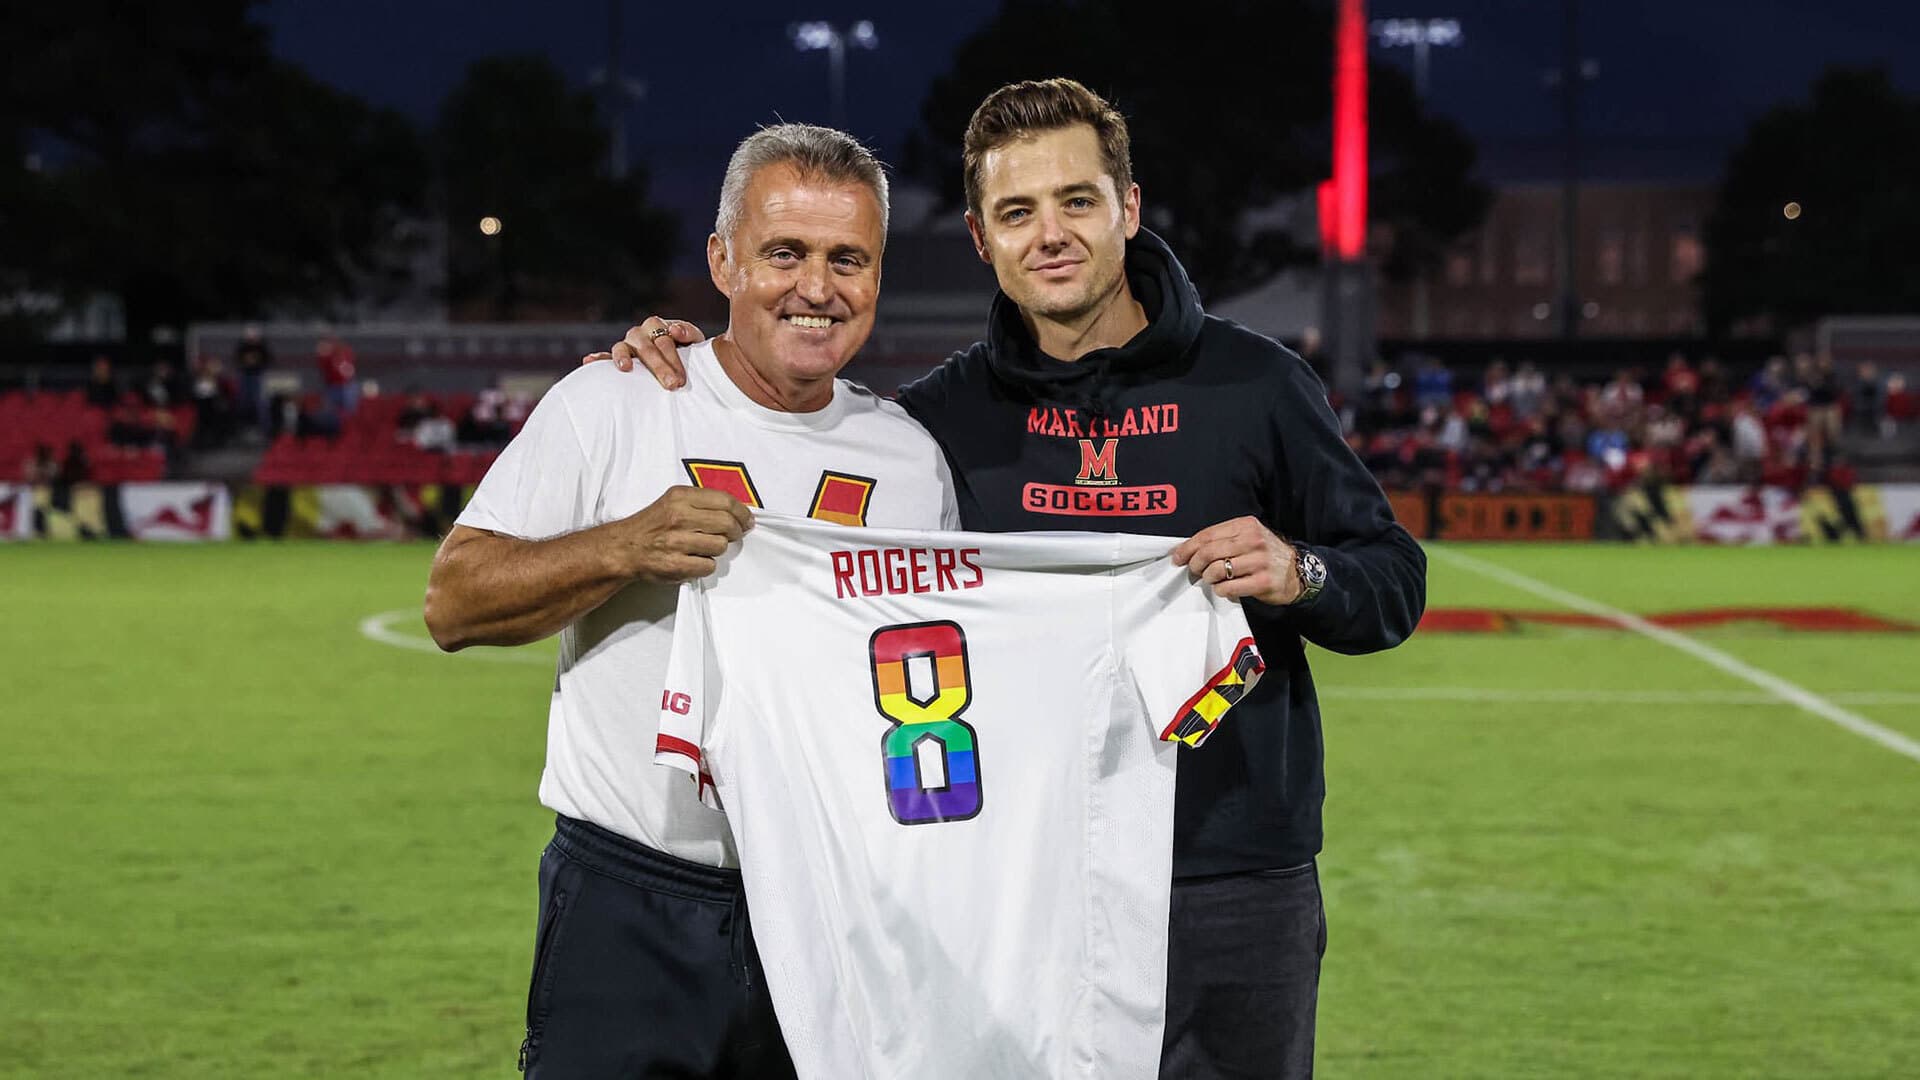 Sasho Cirovski and Robbie Rogers holding a white jersey that says "Rogers" with a rainbow number 8